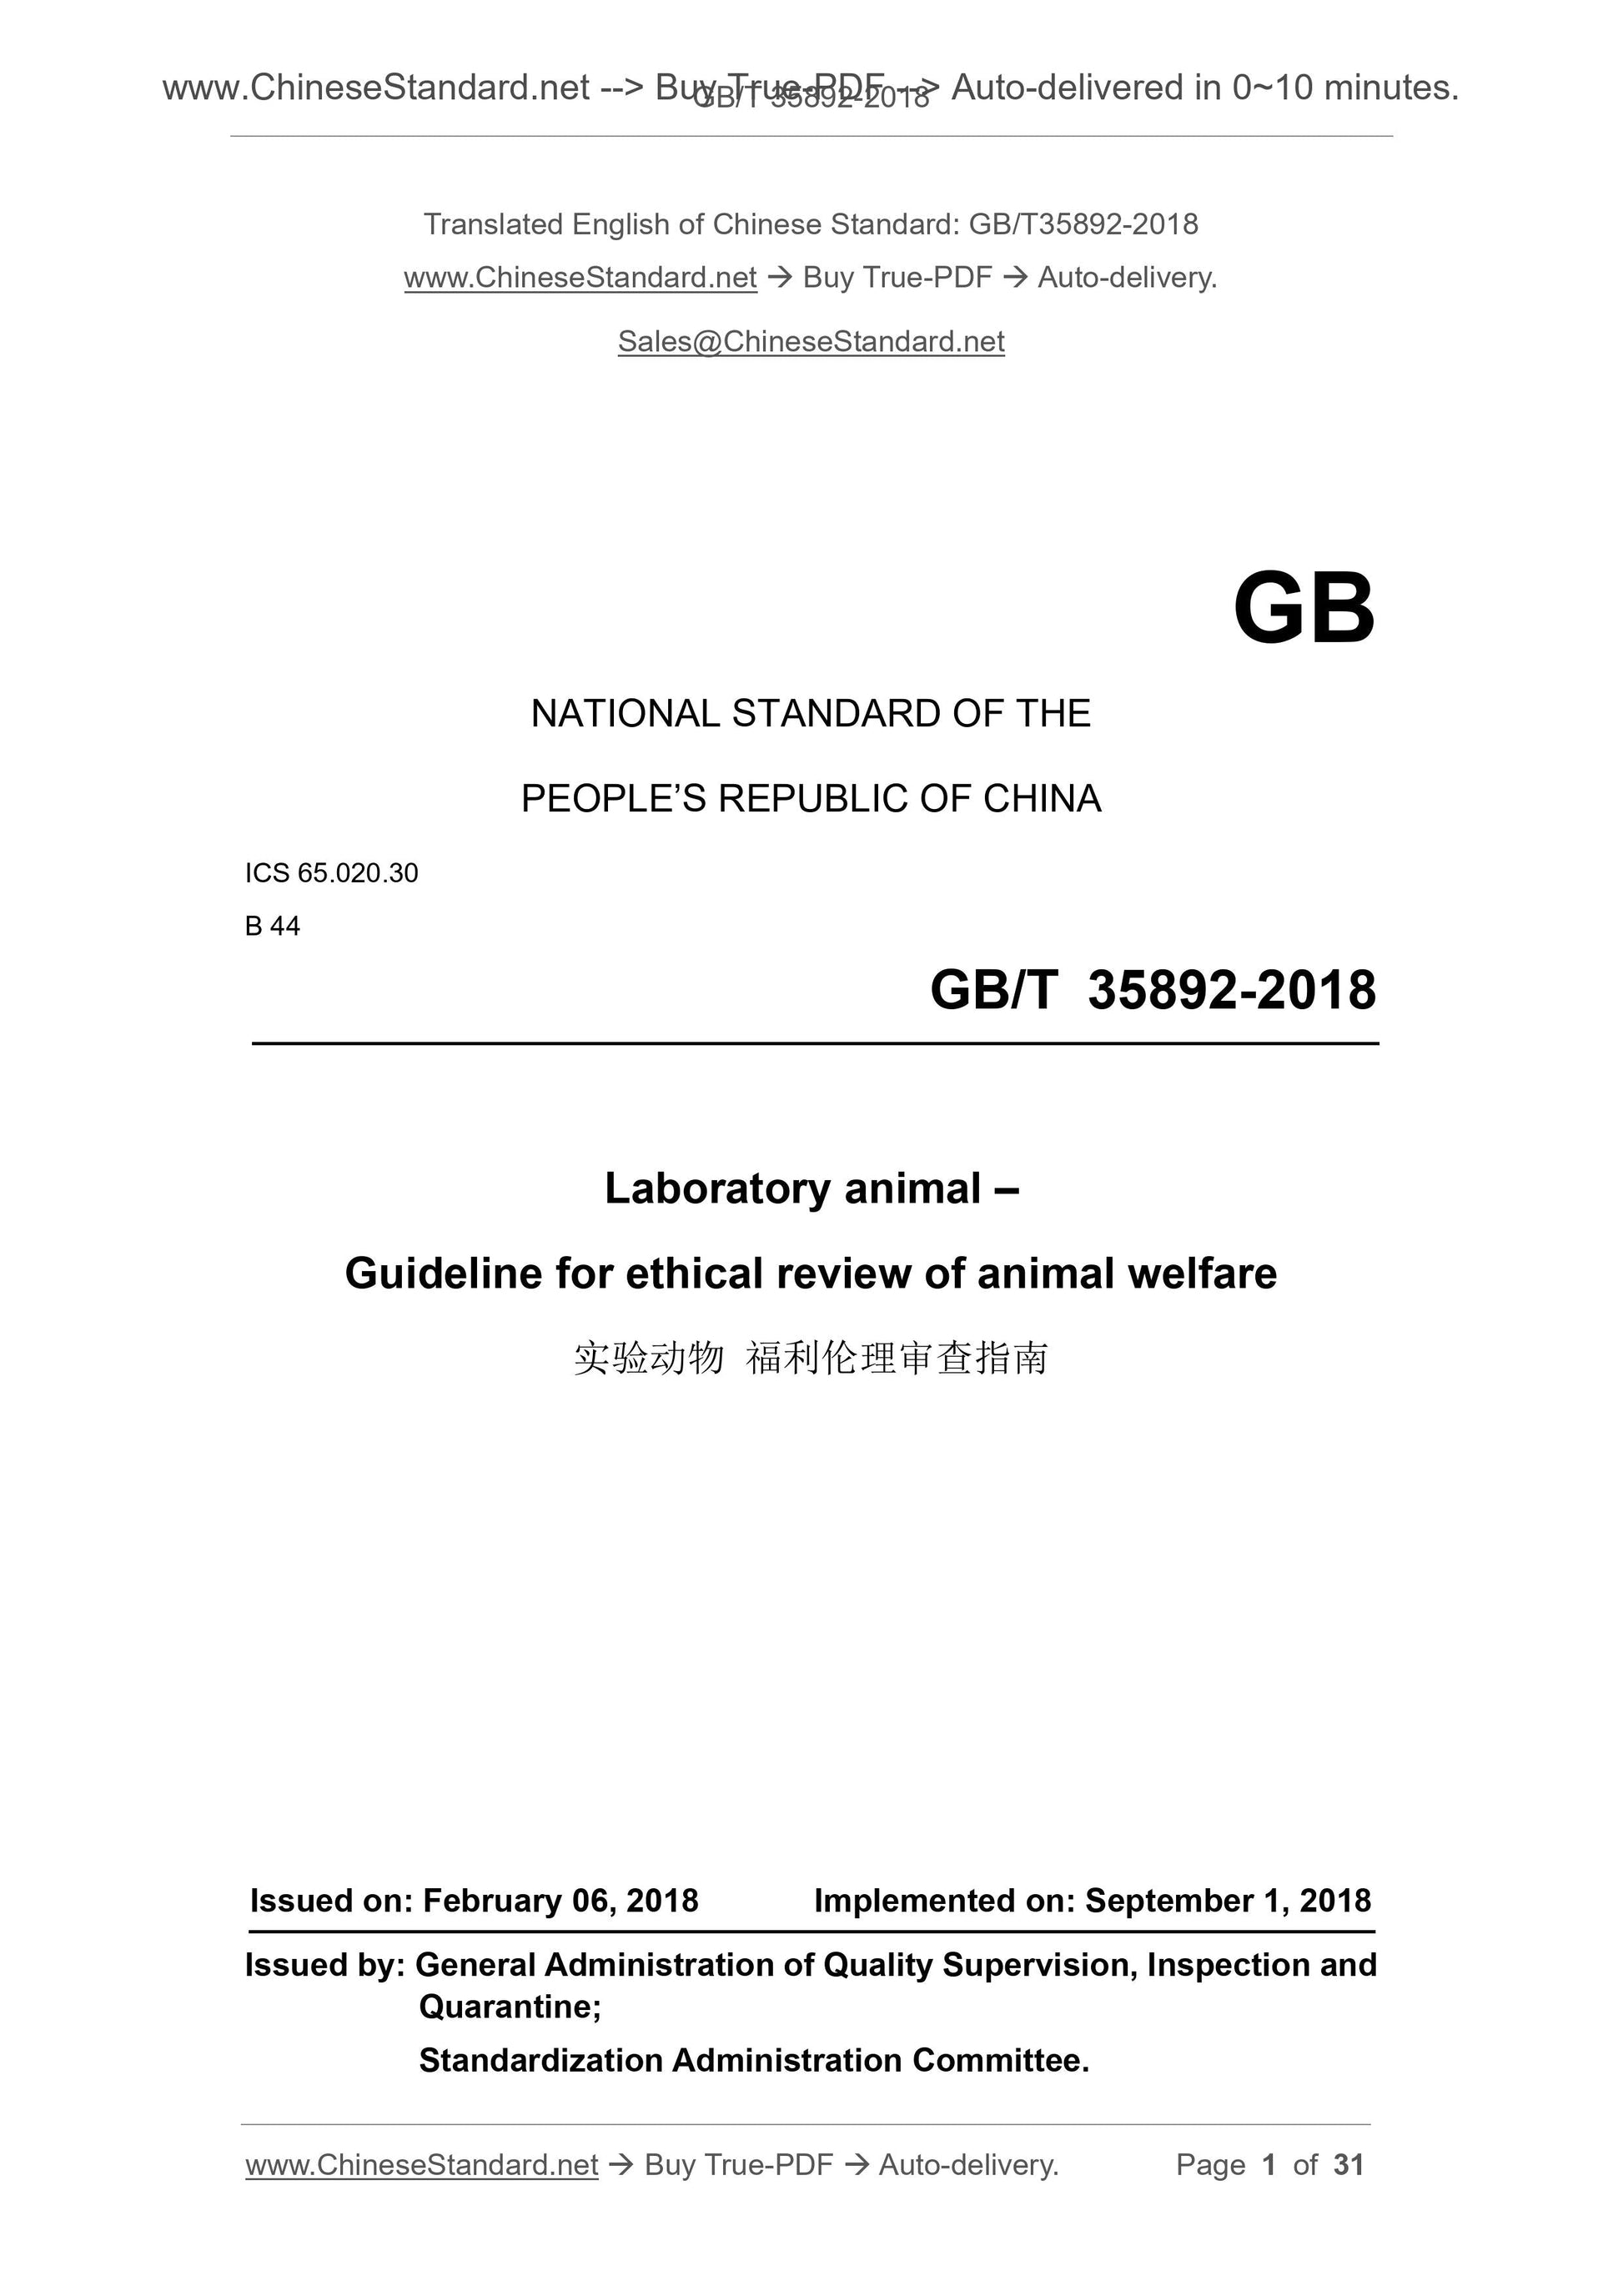 GB/T 35892-2018 Page 1